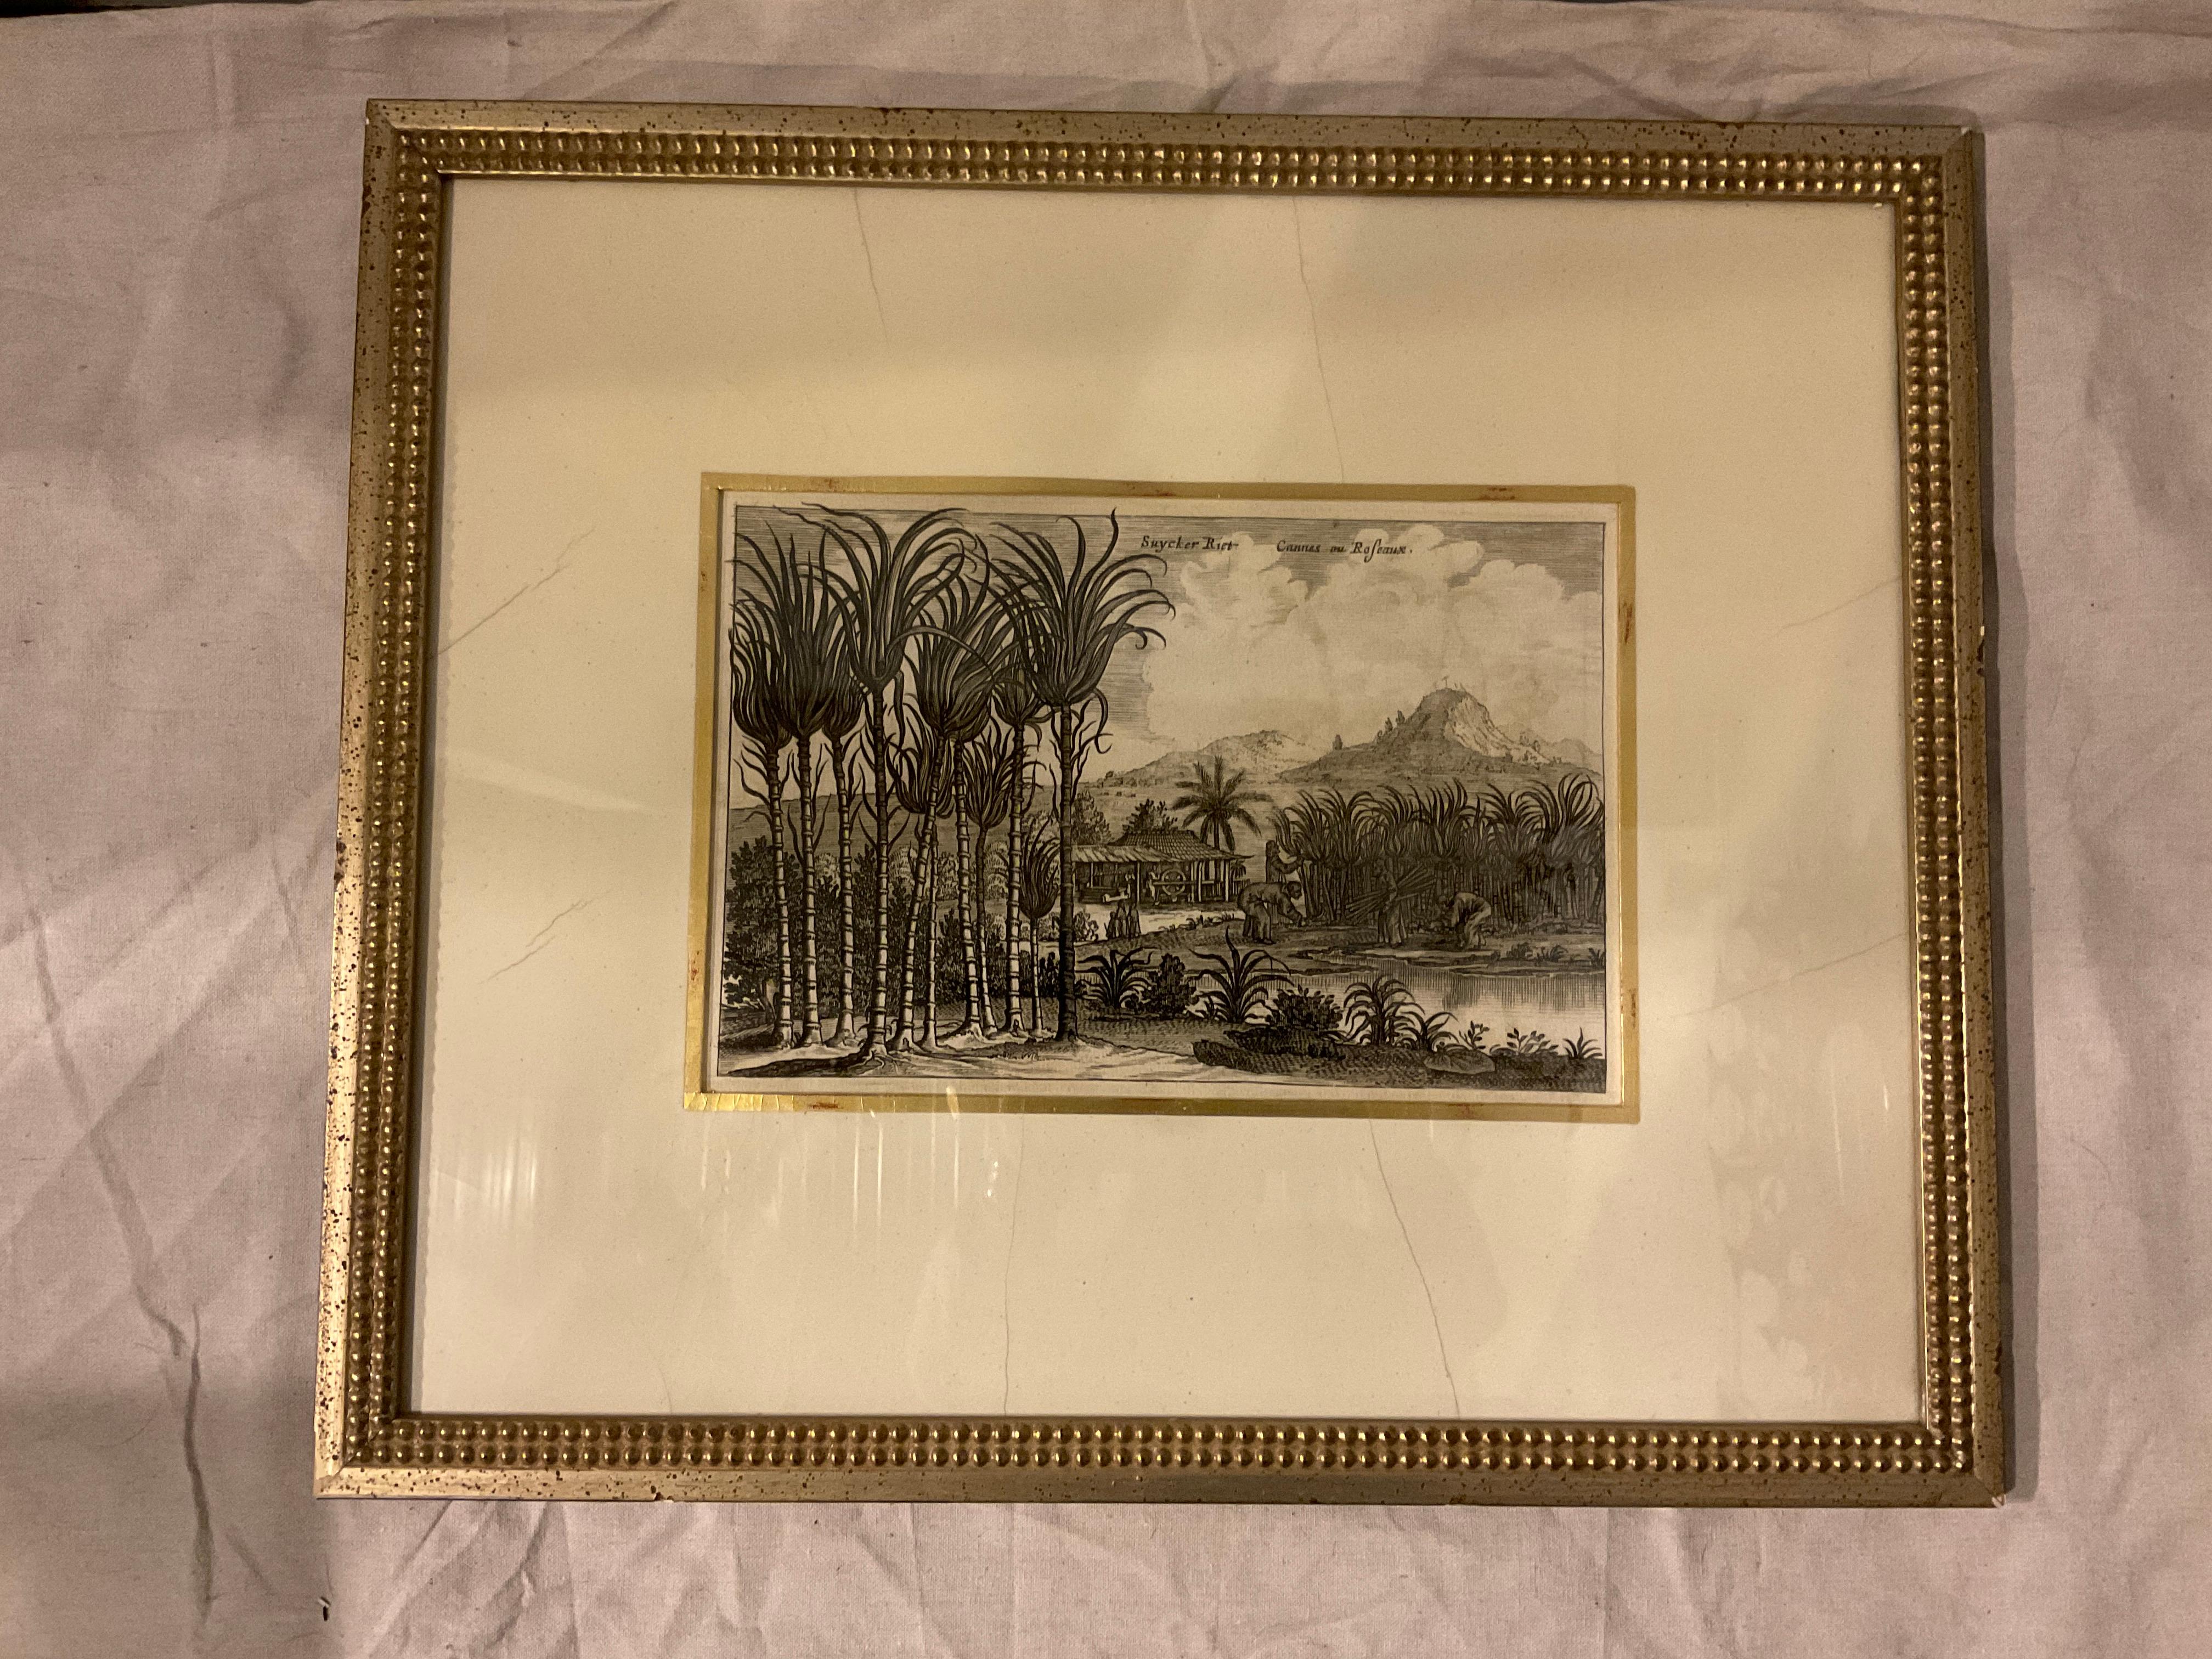 6 Soicher- Marin Tropical Landscape From Asia Prints In Silver Leaf Frames For Sale 6